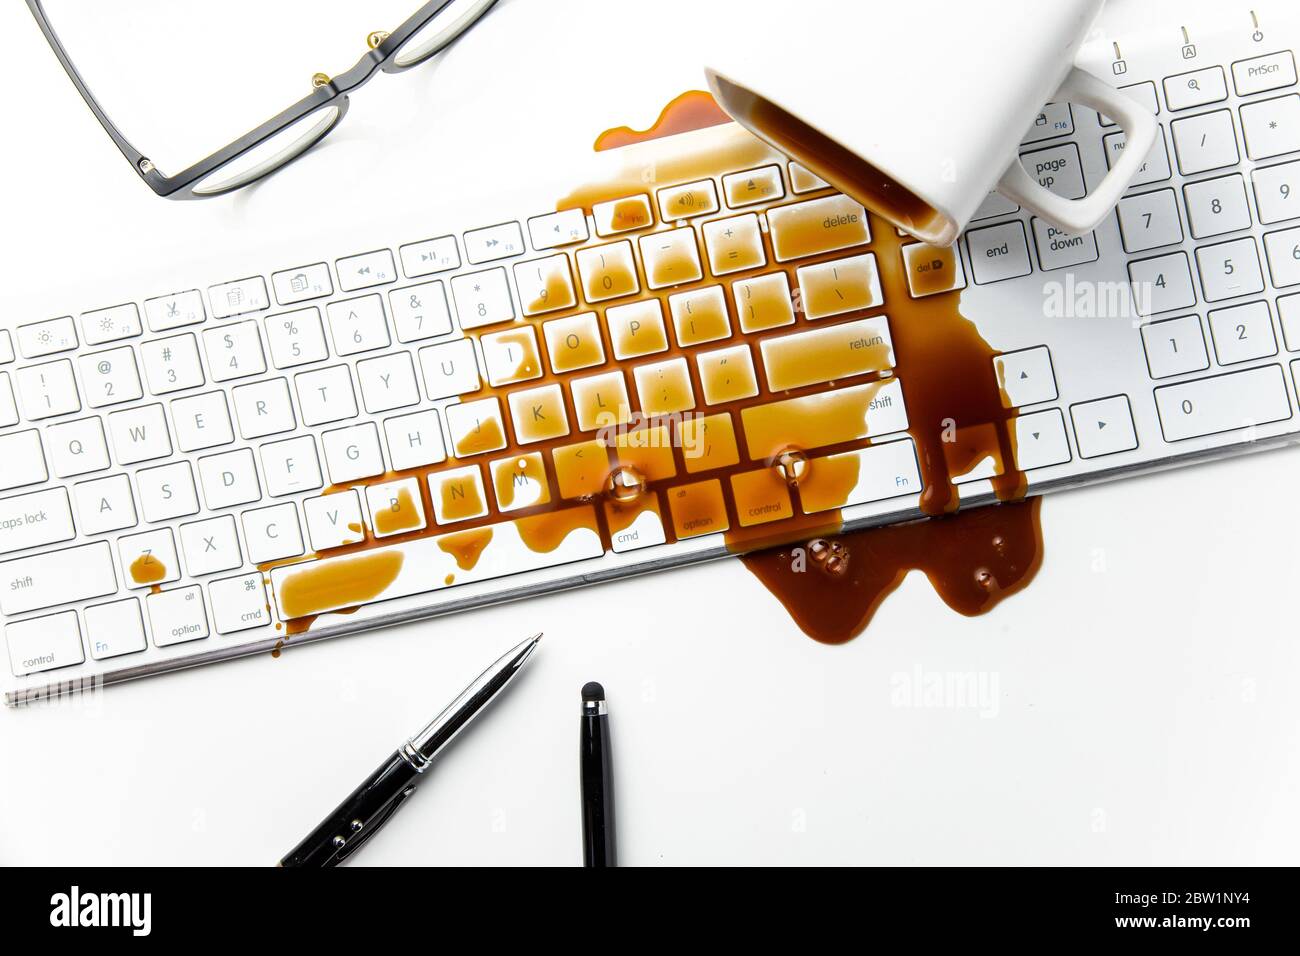 Cup of coffee spilled on office desk concept of careless clumsy or accident Stock Photo